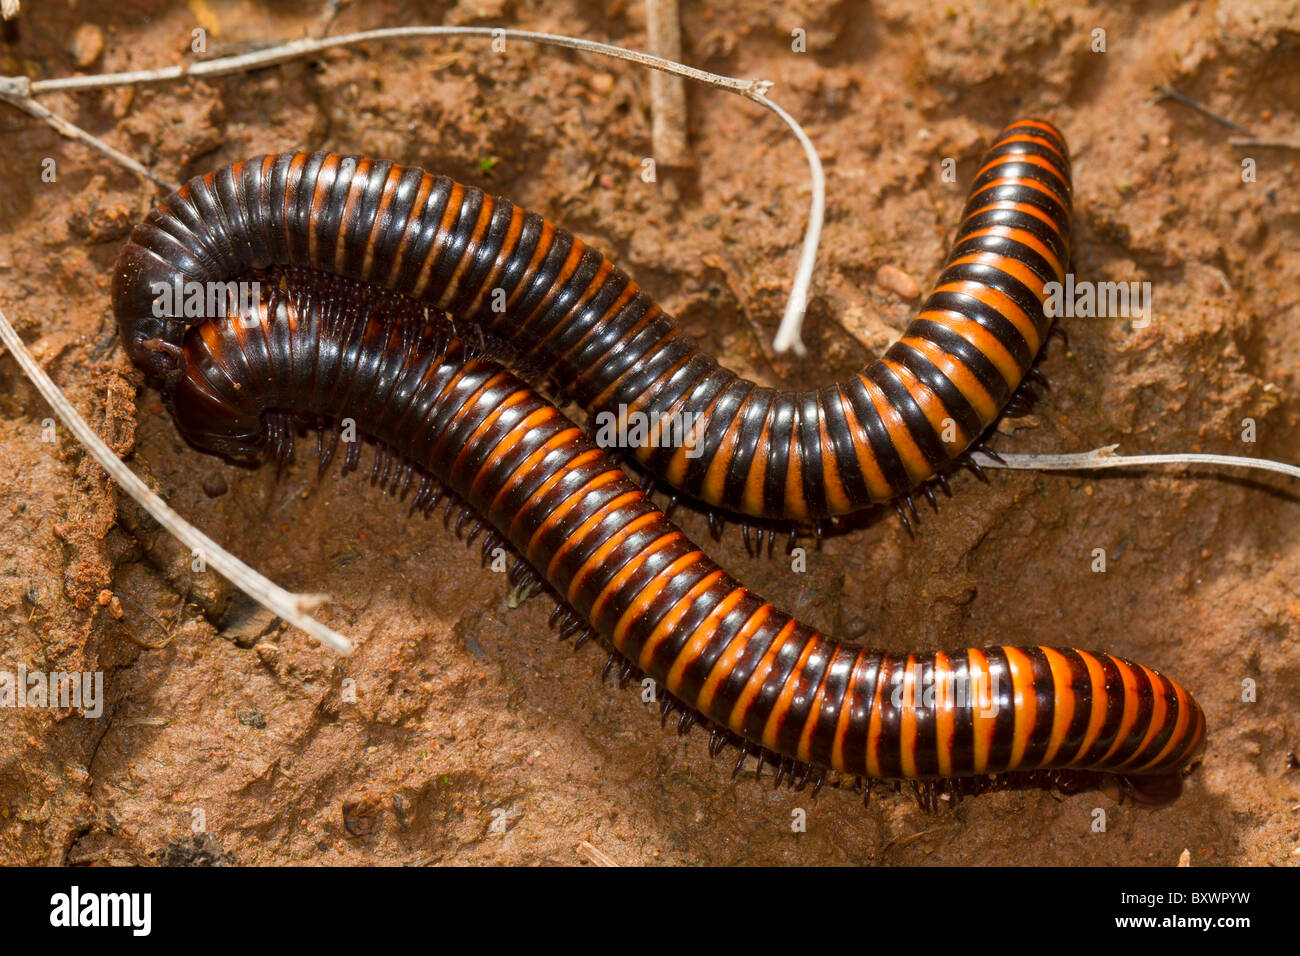 African giant millipede (Archispirostreptidus gigas), mating pair Stock Photo